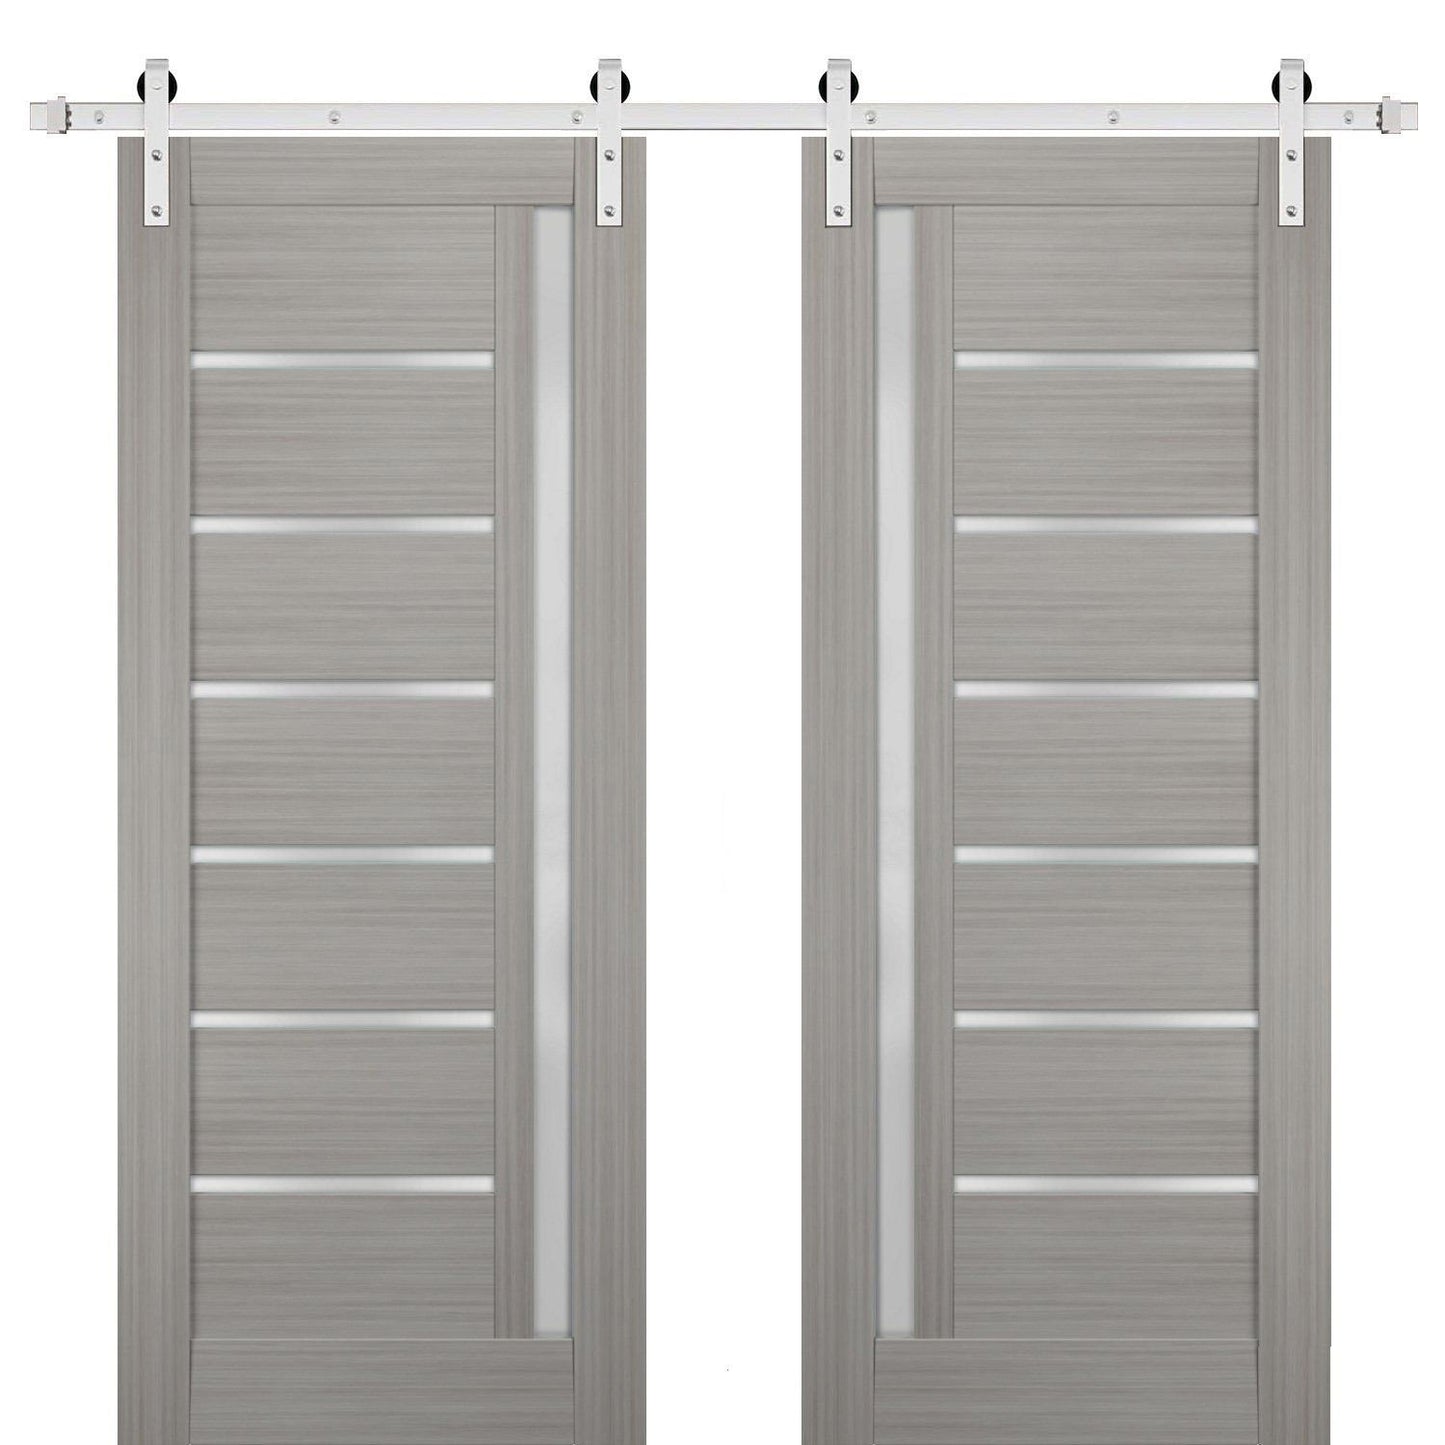 Quadro 4088 Grey Ash Double Barn Door with Frosted Glass | Stainless Steel Rail